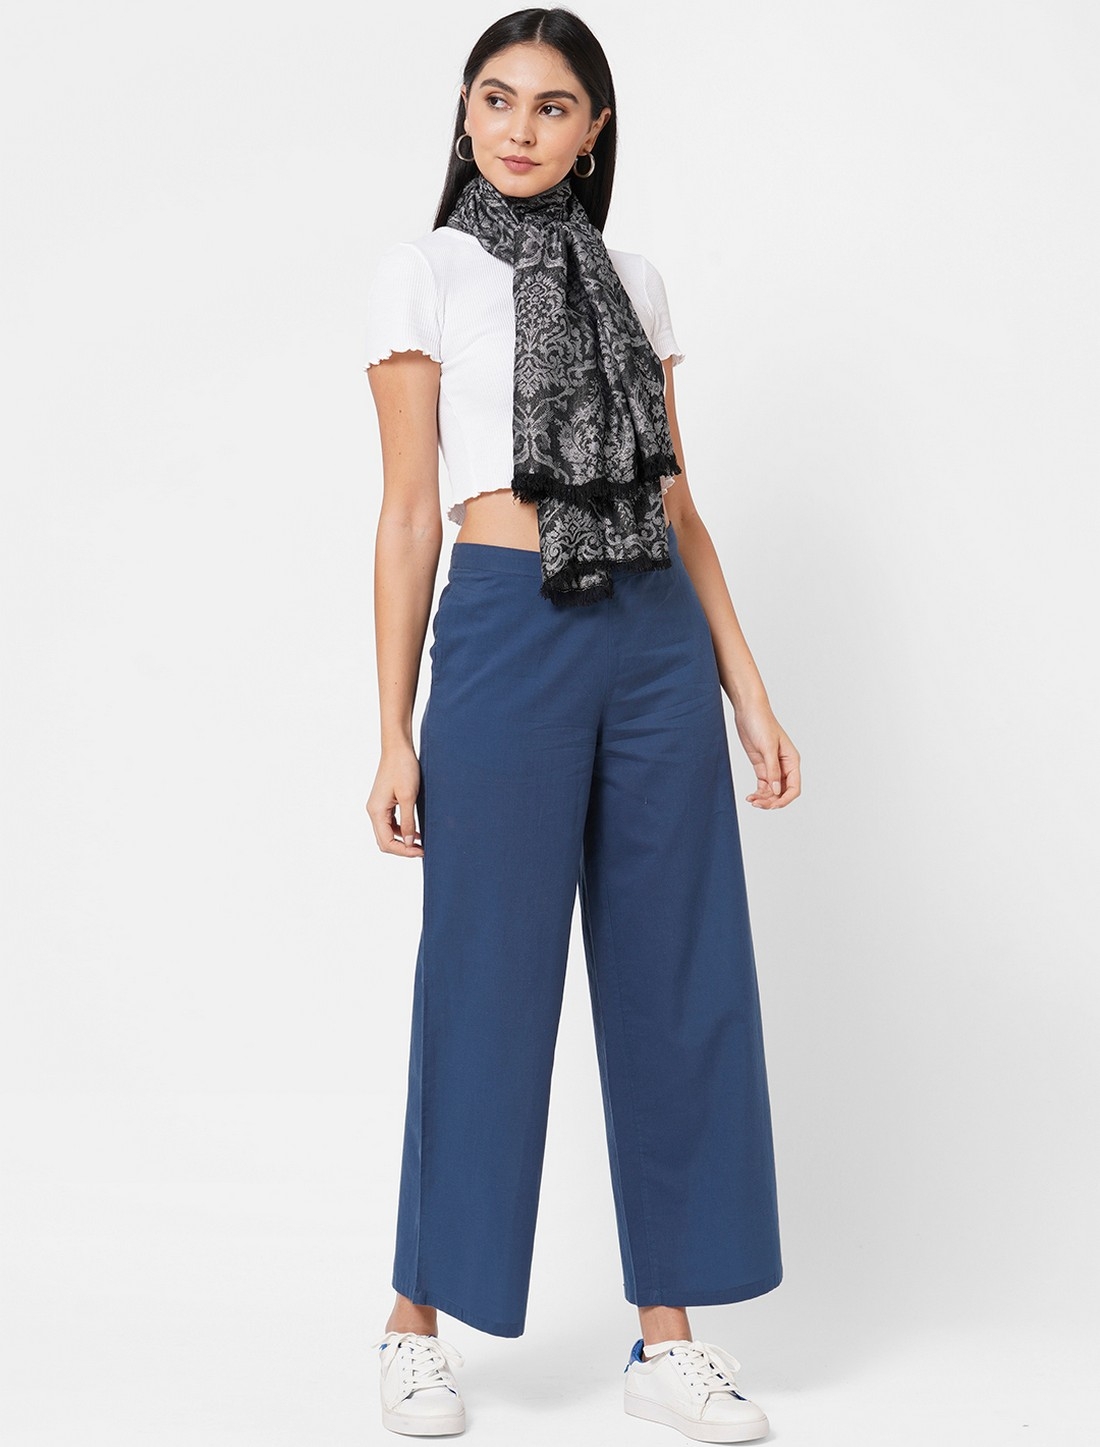 Get Wrapped | Get Wrapped Grey Jacquard Lurex Scarf with raw fringes 2